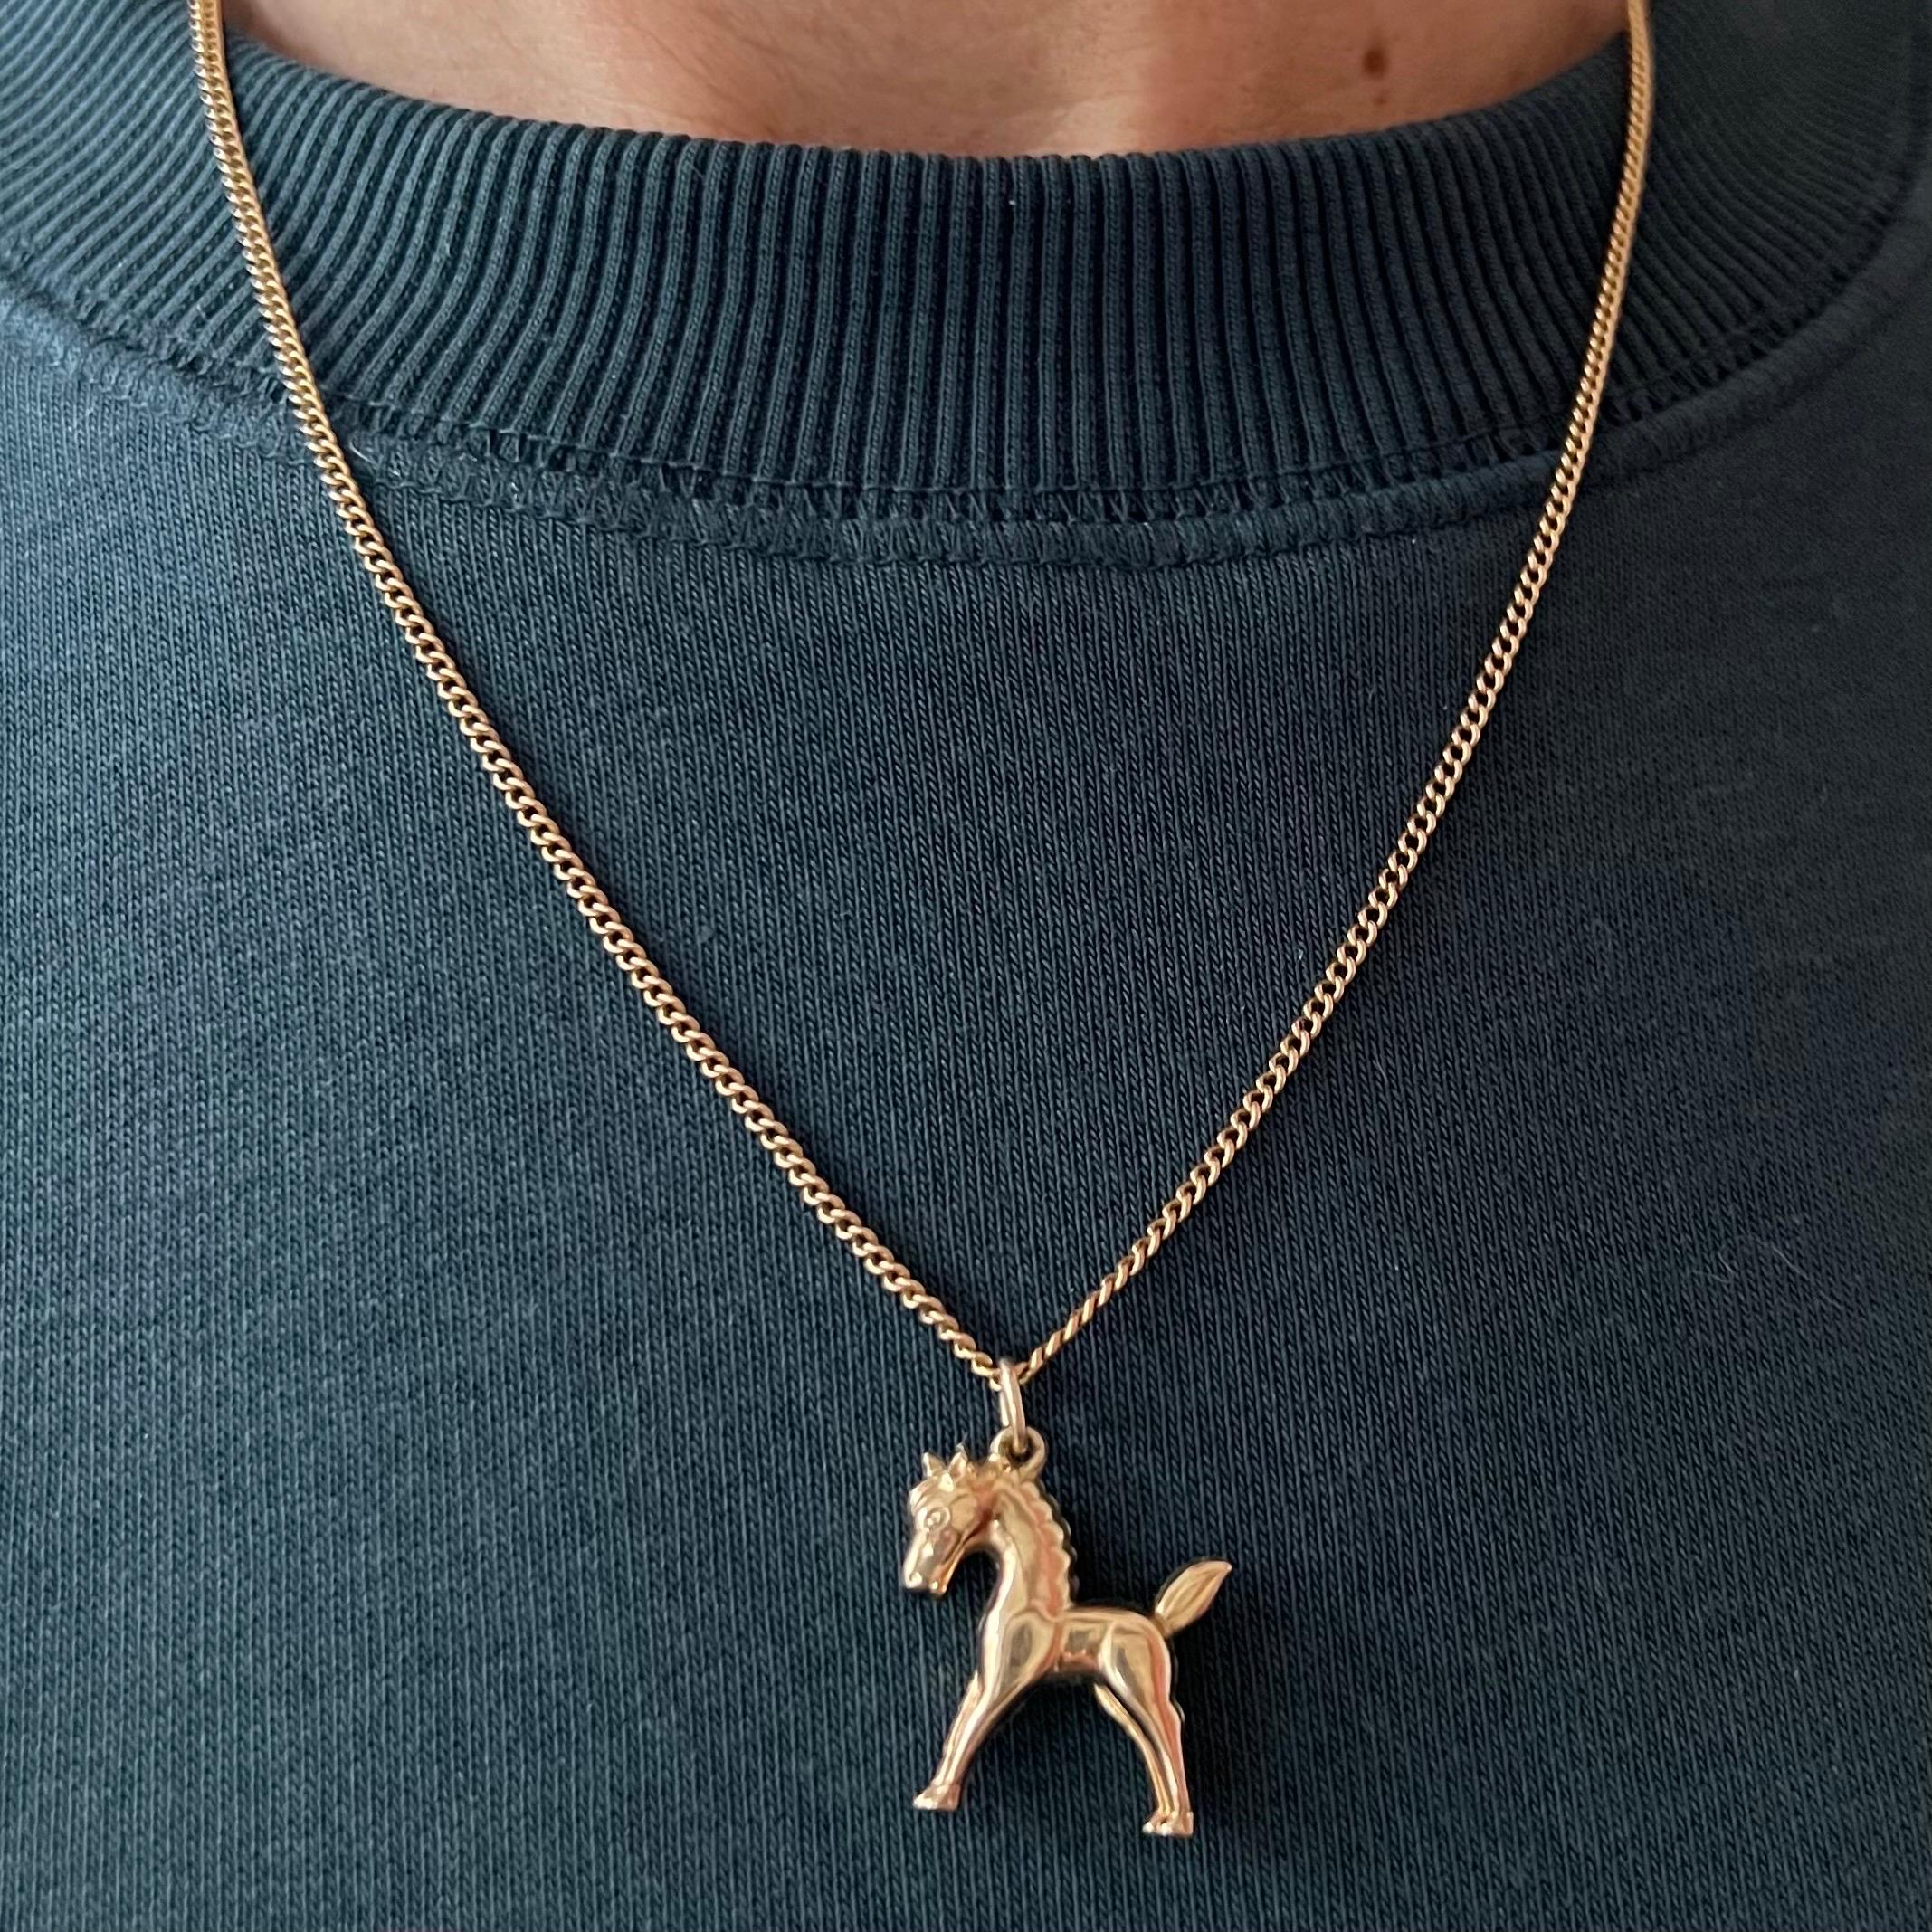 A vintage 9 karat yellow gold horse charm pendant. This horse is beautifully detailed with a raised tail and confident posture. Horses are associated with strength, courage and freedom and they've been seen as steady, trusted companions. Will this